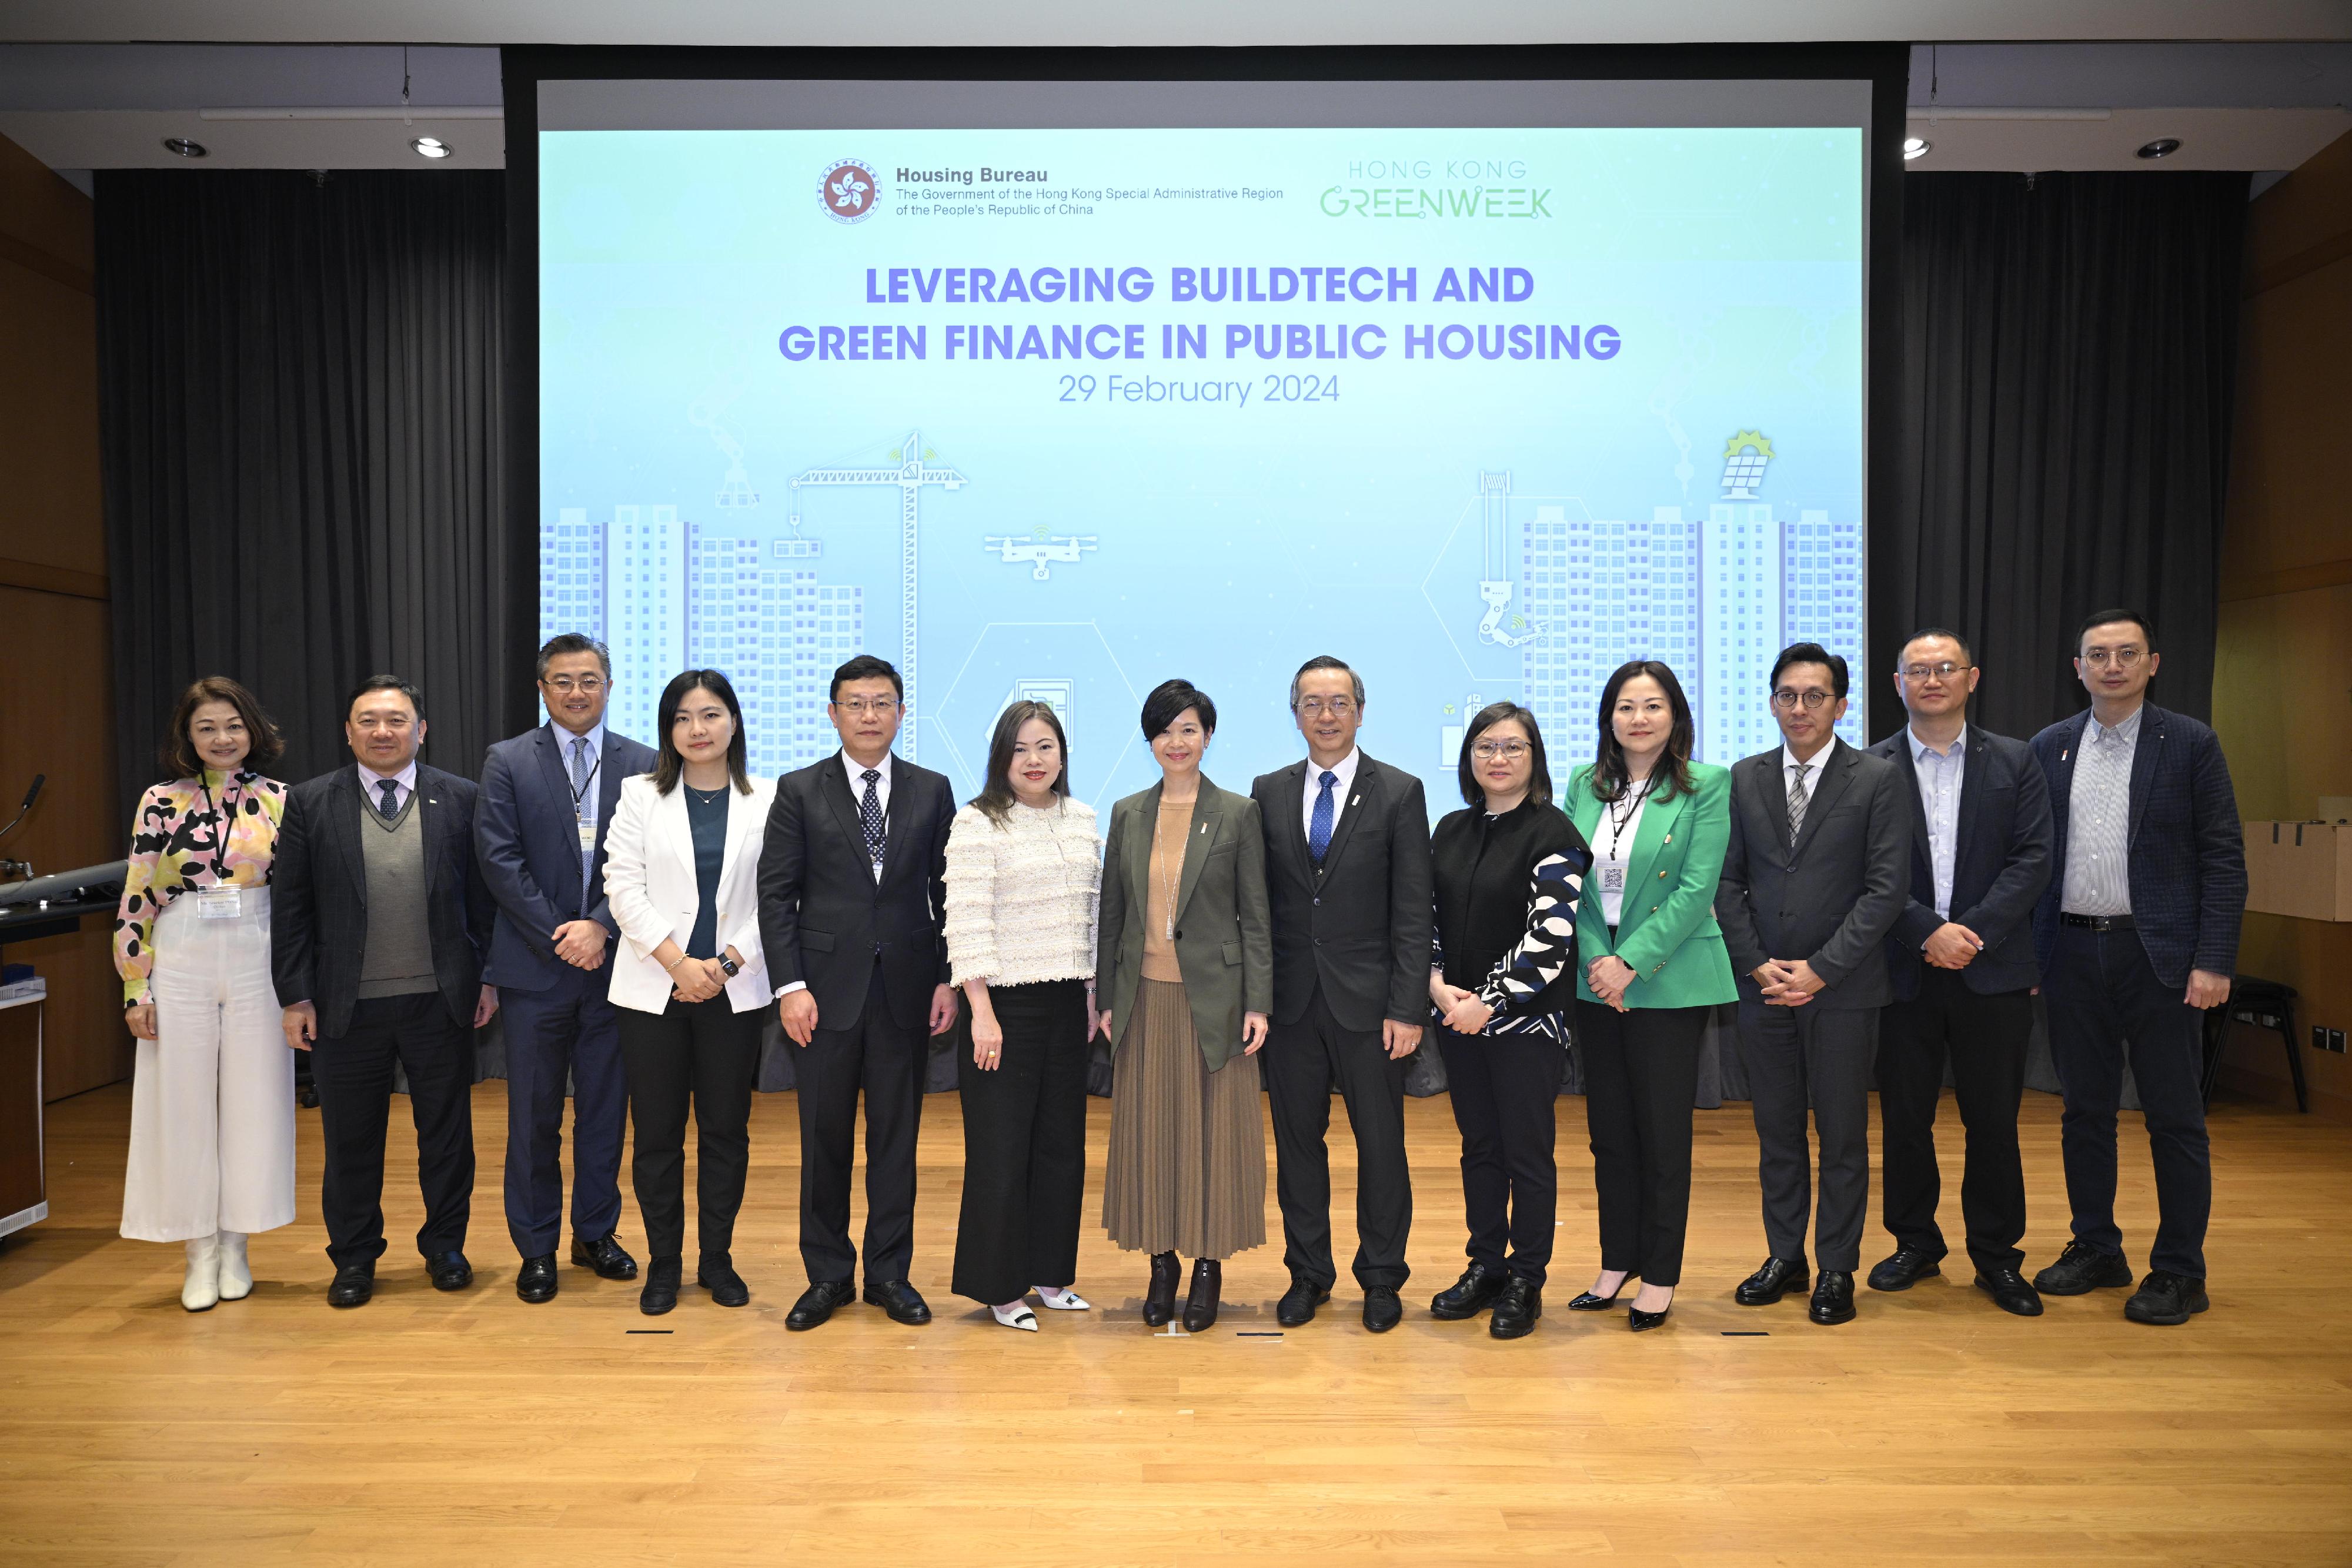 To support Hong Kong Green Week and the Government's initiative in promoting a green economy for sustainable development, the Housing Bureau organised a seminar themed "Leveraging BuildTech and Green Finance in Public Housing" today (February 29). Photo shows the Secretary for Housing, Ms Winnie Ho (centre); the Permanent Secretary for Housing and Director of Housing, Miss Rosanna Law (sixth left); the Under Secretary for Housing, Mr Victor Tai (sixth right), with some guest speakers, including the Assistant Director (Development and Procurement) of the Housing Department, Mr Daniel Leung (third right); the Assistant Director (Estate Management)1, Housing Department Ms Hamidah Haroon (fifth right); the Head of the Department of Civil Engineering at the University of Hong Kong, Professor Pan Wei (fifth left); the Vice Chairman of Yau Lee Holdings Limited, Dr Conrad Wong (second left); the Chief Executive Officer of DaFang Intelligent Technology Company Limited, Mr Andy Deng (second right); the Managing Director of the Hong Kong PropTech Association, Ms Rainie Pan (fourth left); the Chief Executive Officer of Net Zero Asia, Ms Grace Hui (fourth right); Partner and Head of Environment, Social and Governance, KPMG China, Mr Pat Woo (third left), and other attending guests.
